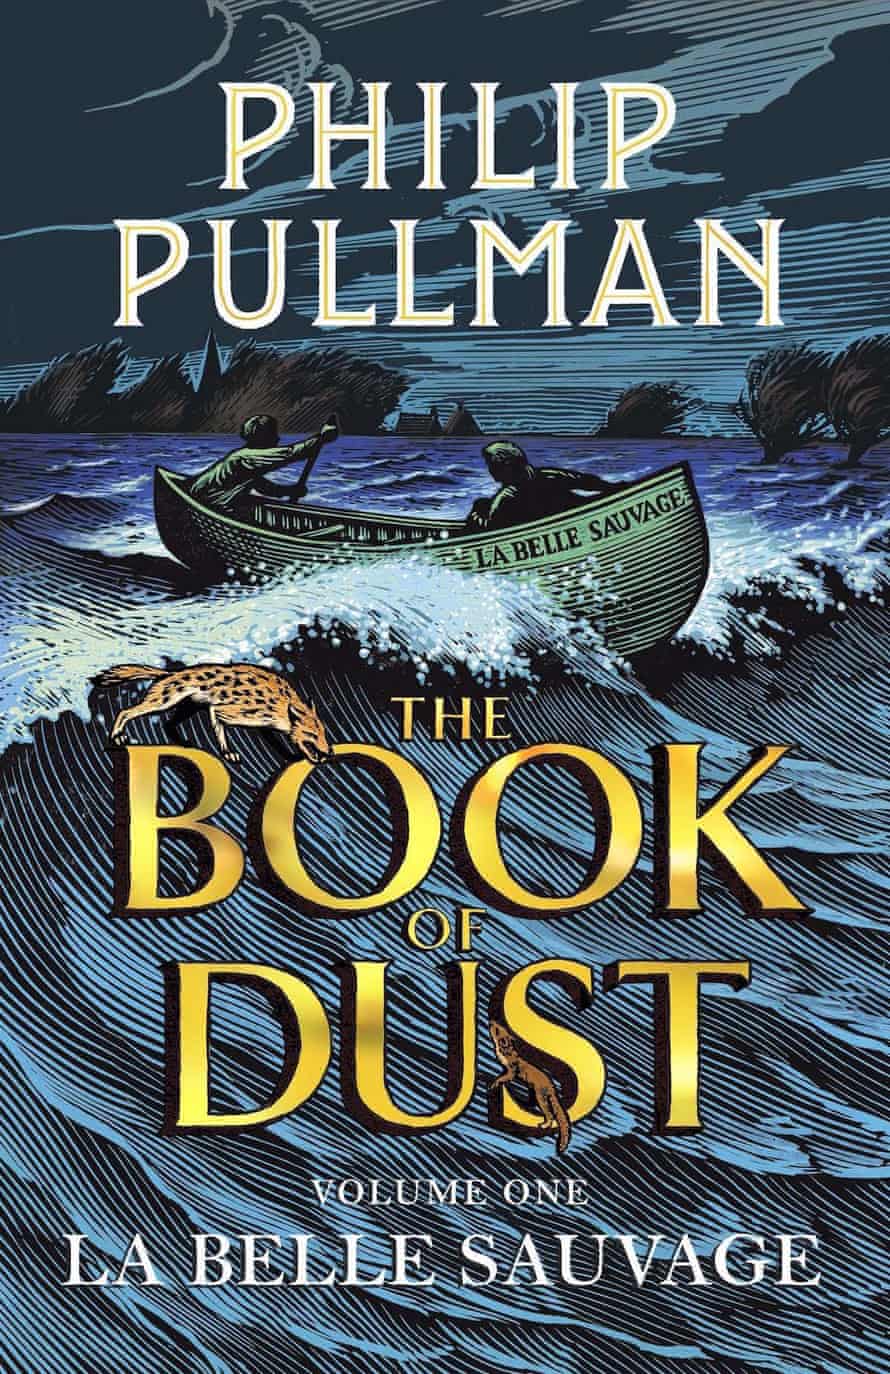 Book of Dust